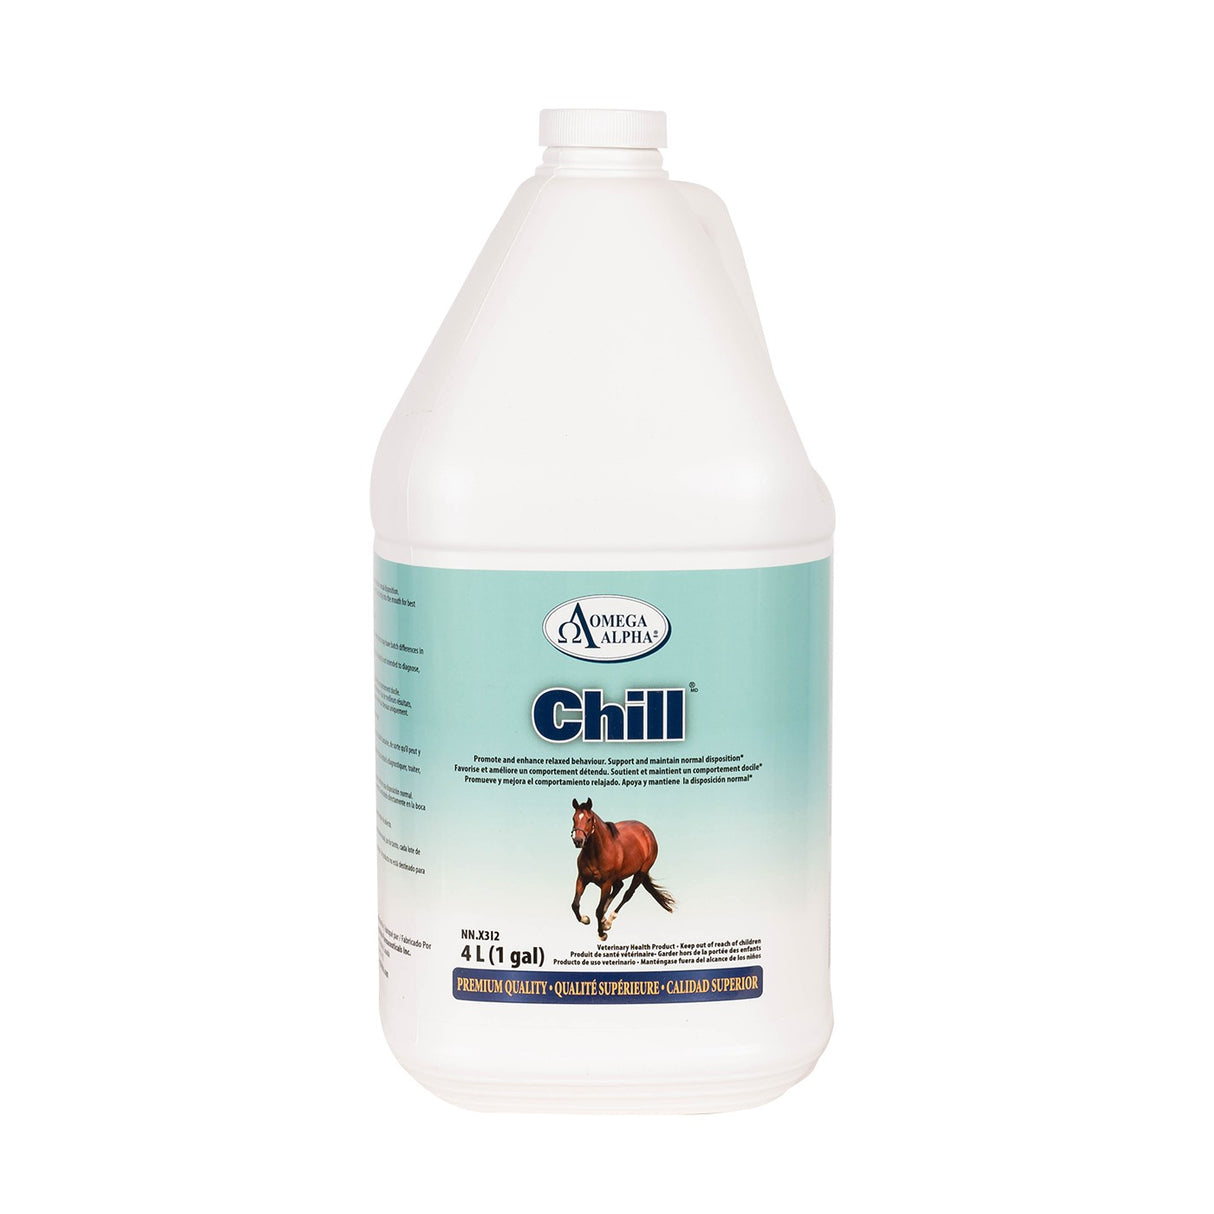 Chills Equestrian - The Horse Exchange